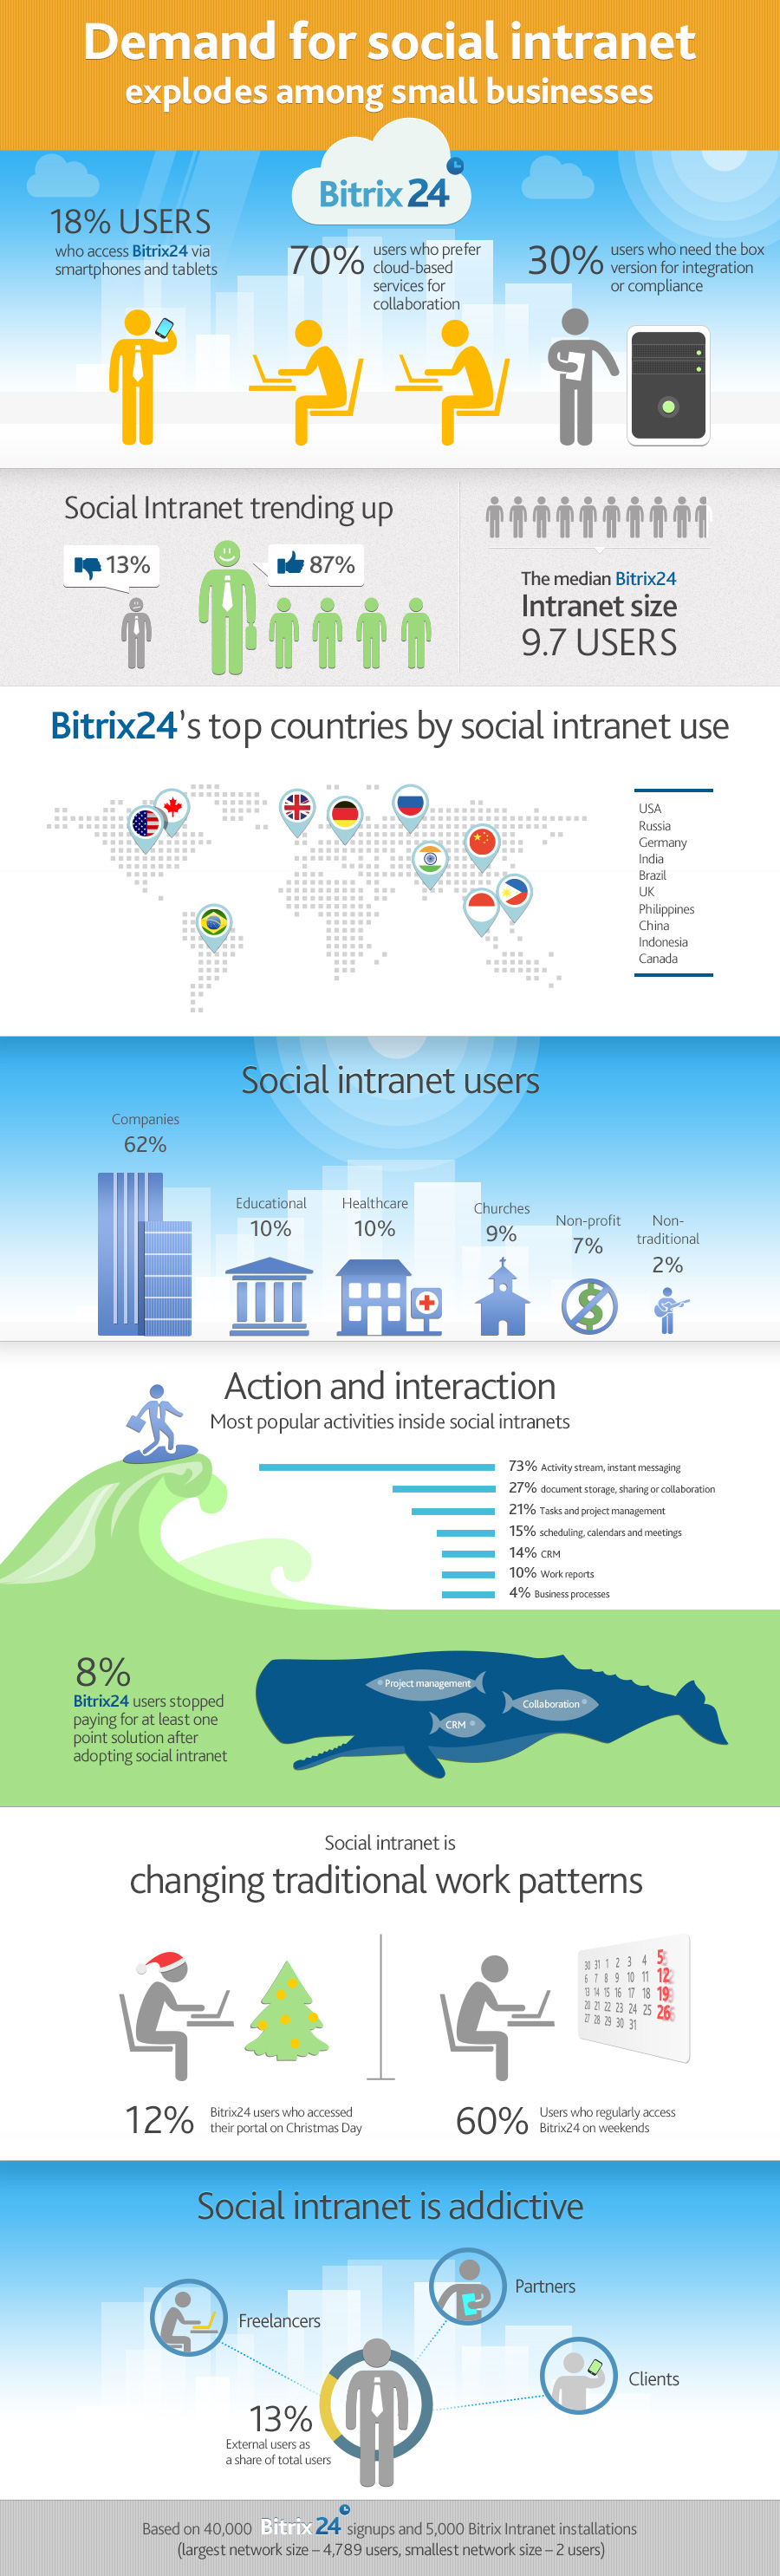 Watch Out Salesforce - Bitrix24 Social Intranet is Here